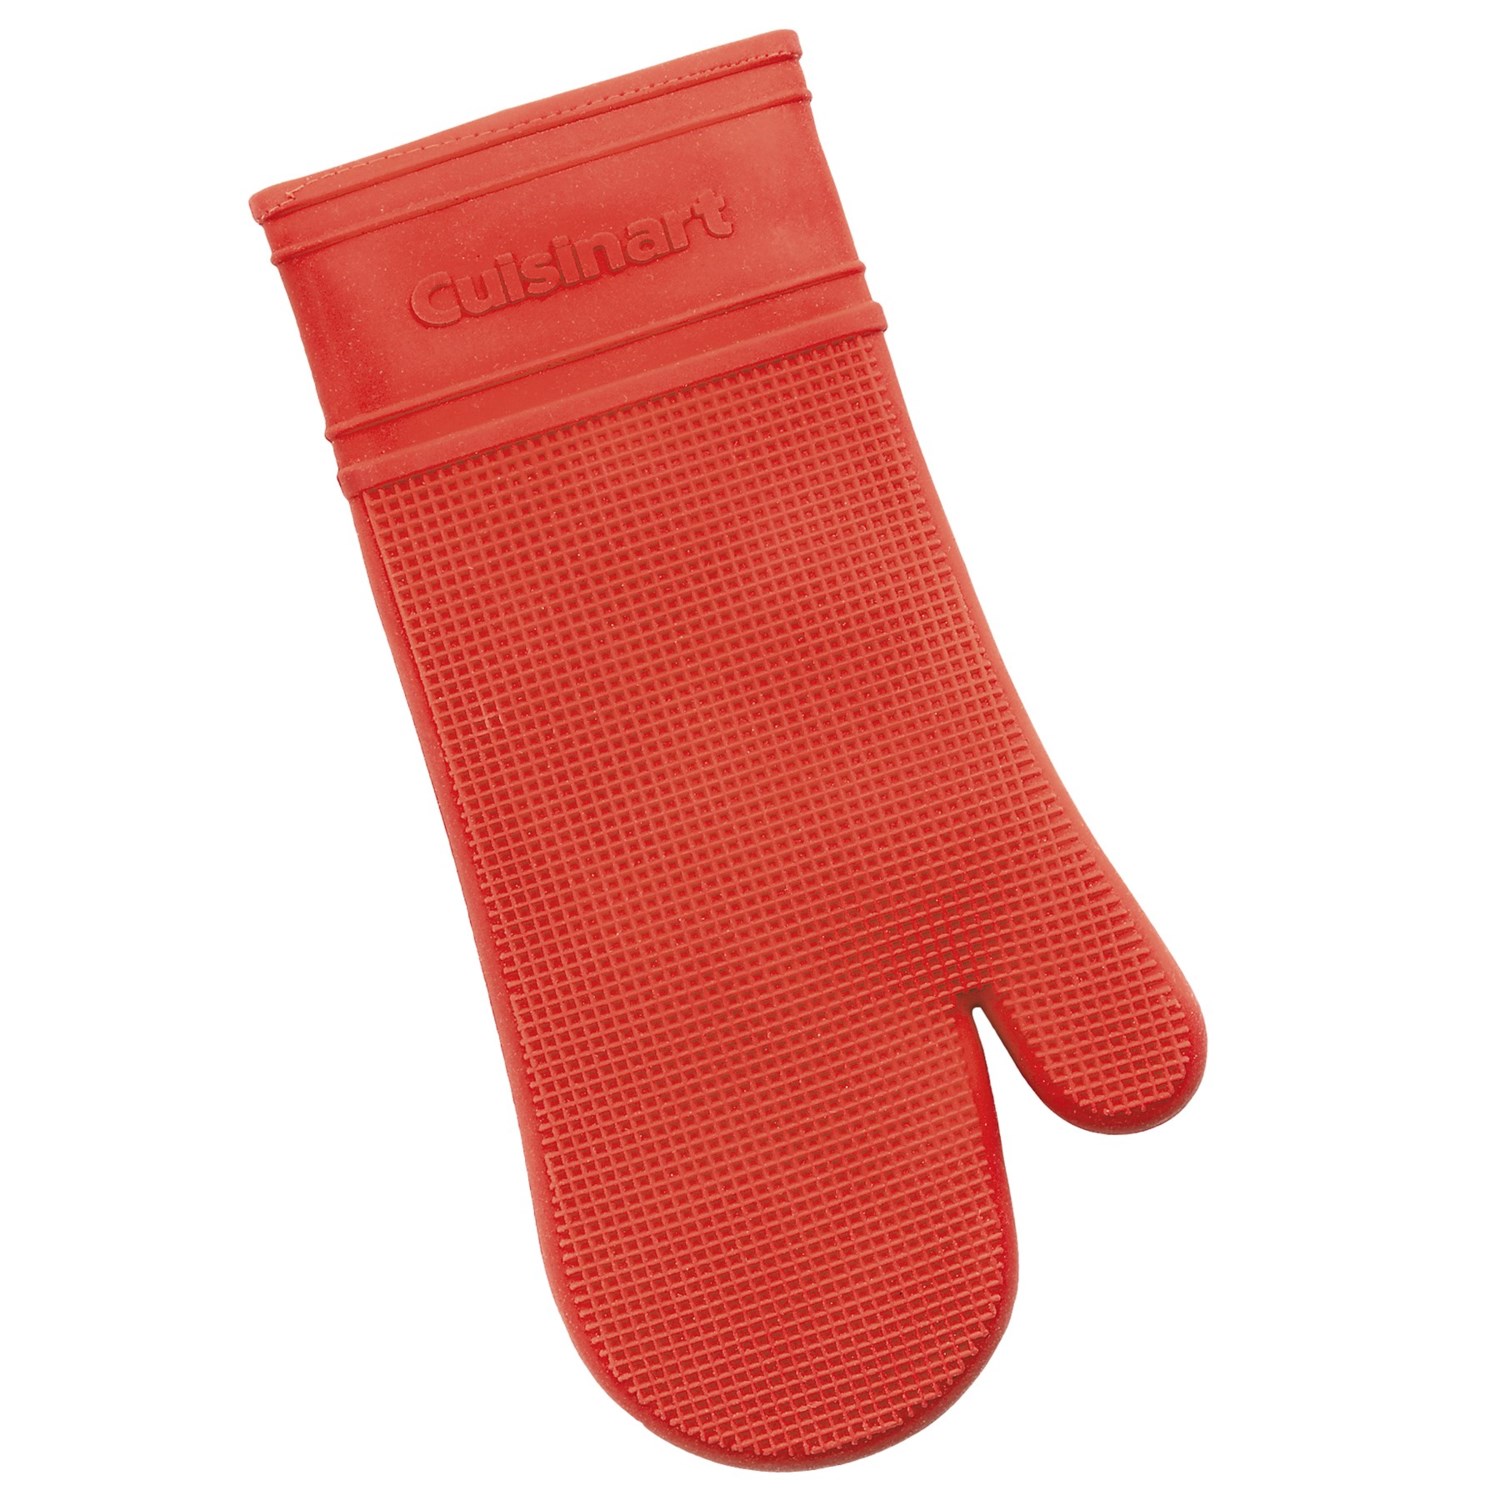 Cuisinart All Silicone Oven Mitt - Quilted Lining - Save 75%